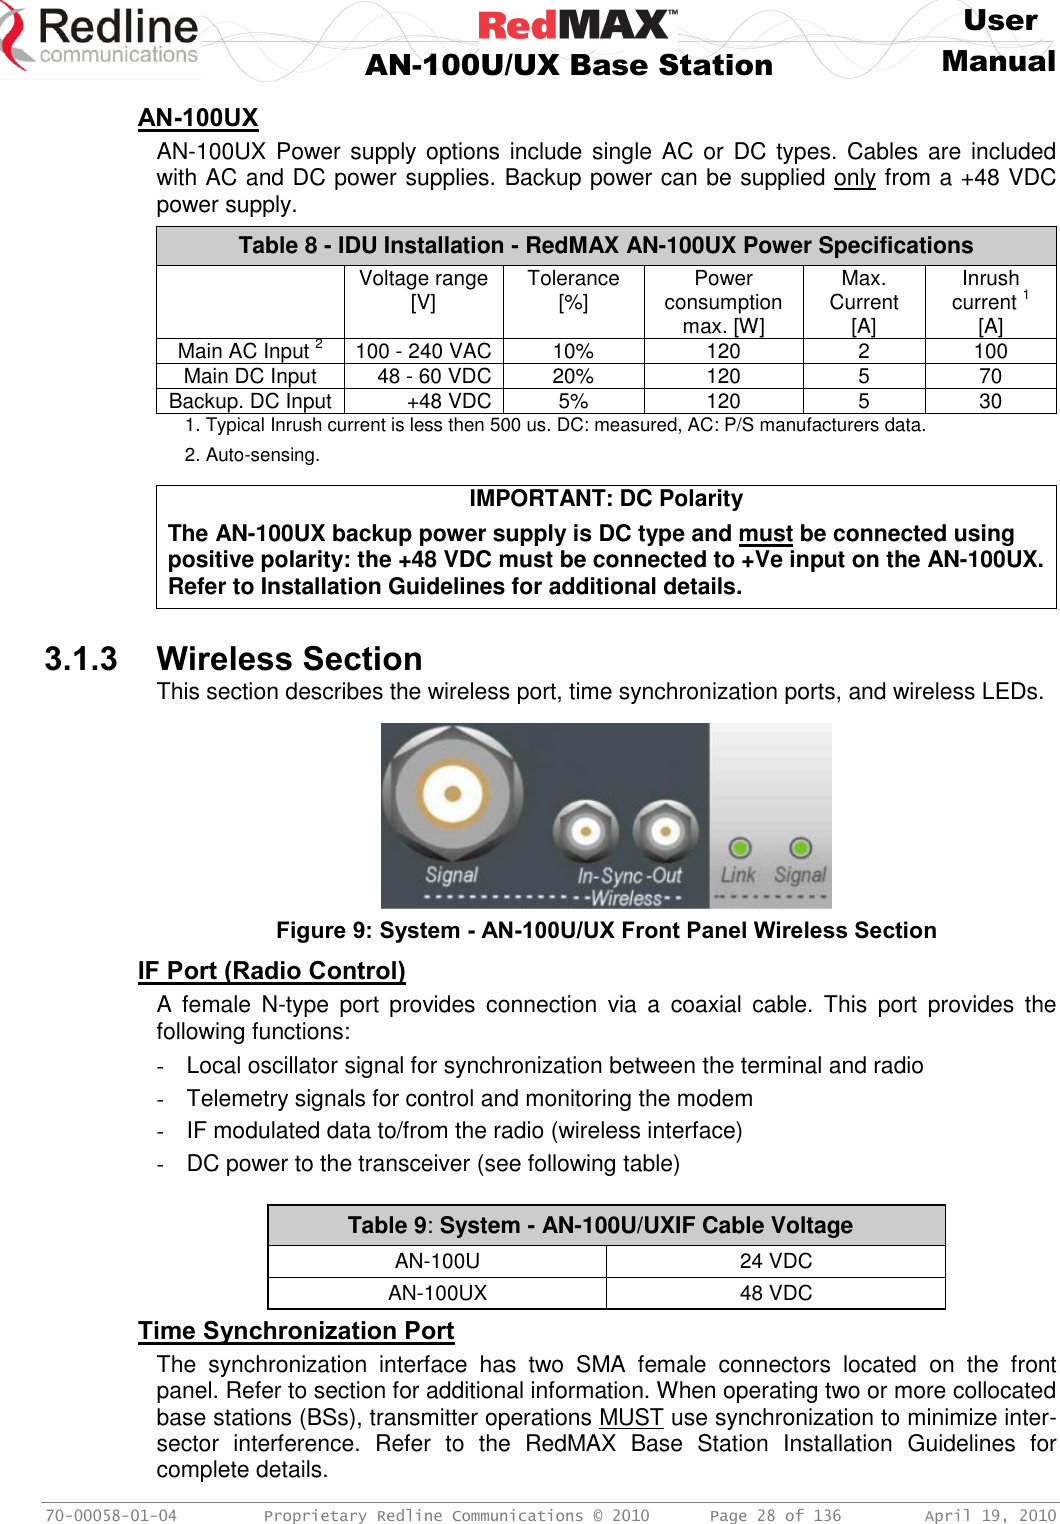     User  AN-100U/UX Base Station Manual   70-00058-01-04  Proprietary Redline Communications © 2010   Page 28 of 136  April 19, 2010 AN-100UX AN-100UX Power supply options include single AC or  DC  types. Cables are included with AC and DC power supplies. Backup power can be supplied only from a +48 VDC power supply. Table 8 - IDU Installation - RedMAX AN-100UX Power Specifications  Voltage range [V] Tolerance [%] Power consumption max. [W] Max. Current [A] Inrush current 1 [A] Main AC Input 2 100 - 240 VAC 10% 120 2 100 Main DC Input 48 - 60 VDC 20% 120 5 70 Backup. DC Input +48 VDC 5% 120 5 30 1. Typical Inrush current is less then 500 us. DC: measured, AC: P/S manufacturers data. 2. Auto-sensing.  IMPORTANT: DC Polarity The AN-100UX backup power supply is DC type and must be connected using positive polarity: the +48 VDC must be connected to +Ve input on the AN-100UX. Refer to Installation Guidelines for additional details.   3.1.3 Wireless Section This section describes the wireless port, time synchronization ports, and wireless LEDs.   Figure 9: System - AN-100U/UX Front Panel Wireless Section IF Port (Radio Control) A  female  N-type  port  provides  connection  via  a  coaxial  cable.  This  port  provides  the following functions: -  Local oscillator signal for synchronization between the terminal and radio -  Telemetry signals for control and monitoring the modem -  IF modulated data to/from the radio (wireless interface) -  DC power to the transceiver (see following table)   Table 9: System - AN-100U/UXIF Cable Voltage  AN-100U 24 VDC AN-100UX 48 VDC Time Synchronization Port The  synchronization  interface  has  two  SMA  female  connectors  located  on  the  front panel. Refer to section for additional information. When operating two or more collocated base stations (BSs), transmitter operations MUST use synchronization to minimize inter-sector  interference.  Refer  to  the  RedMAX  Base  Station  Installation  Guidelines  for complete details. 